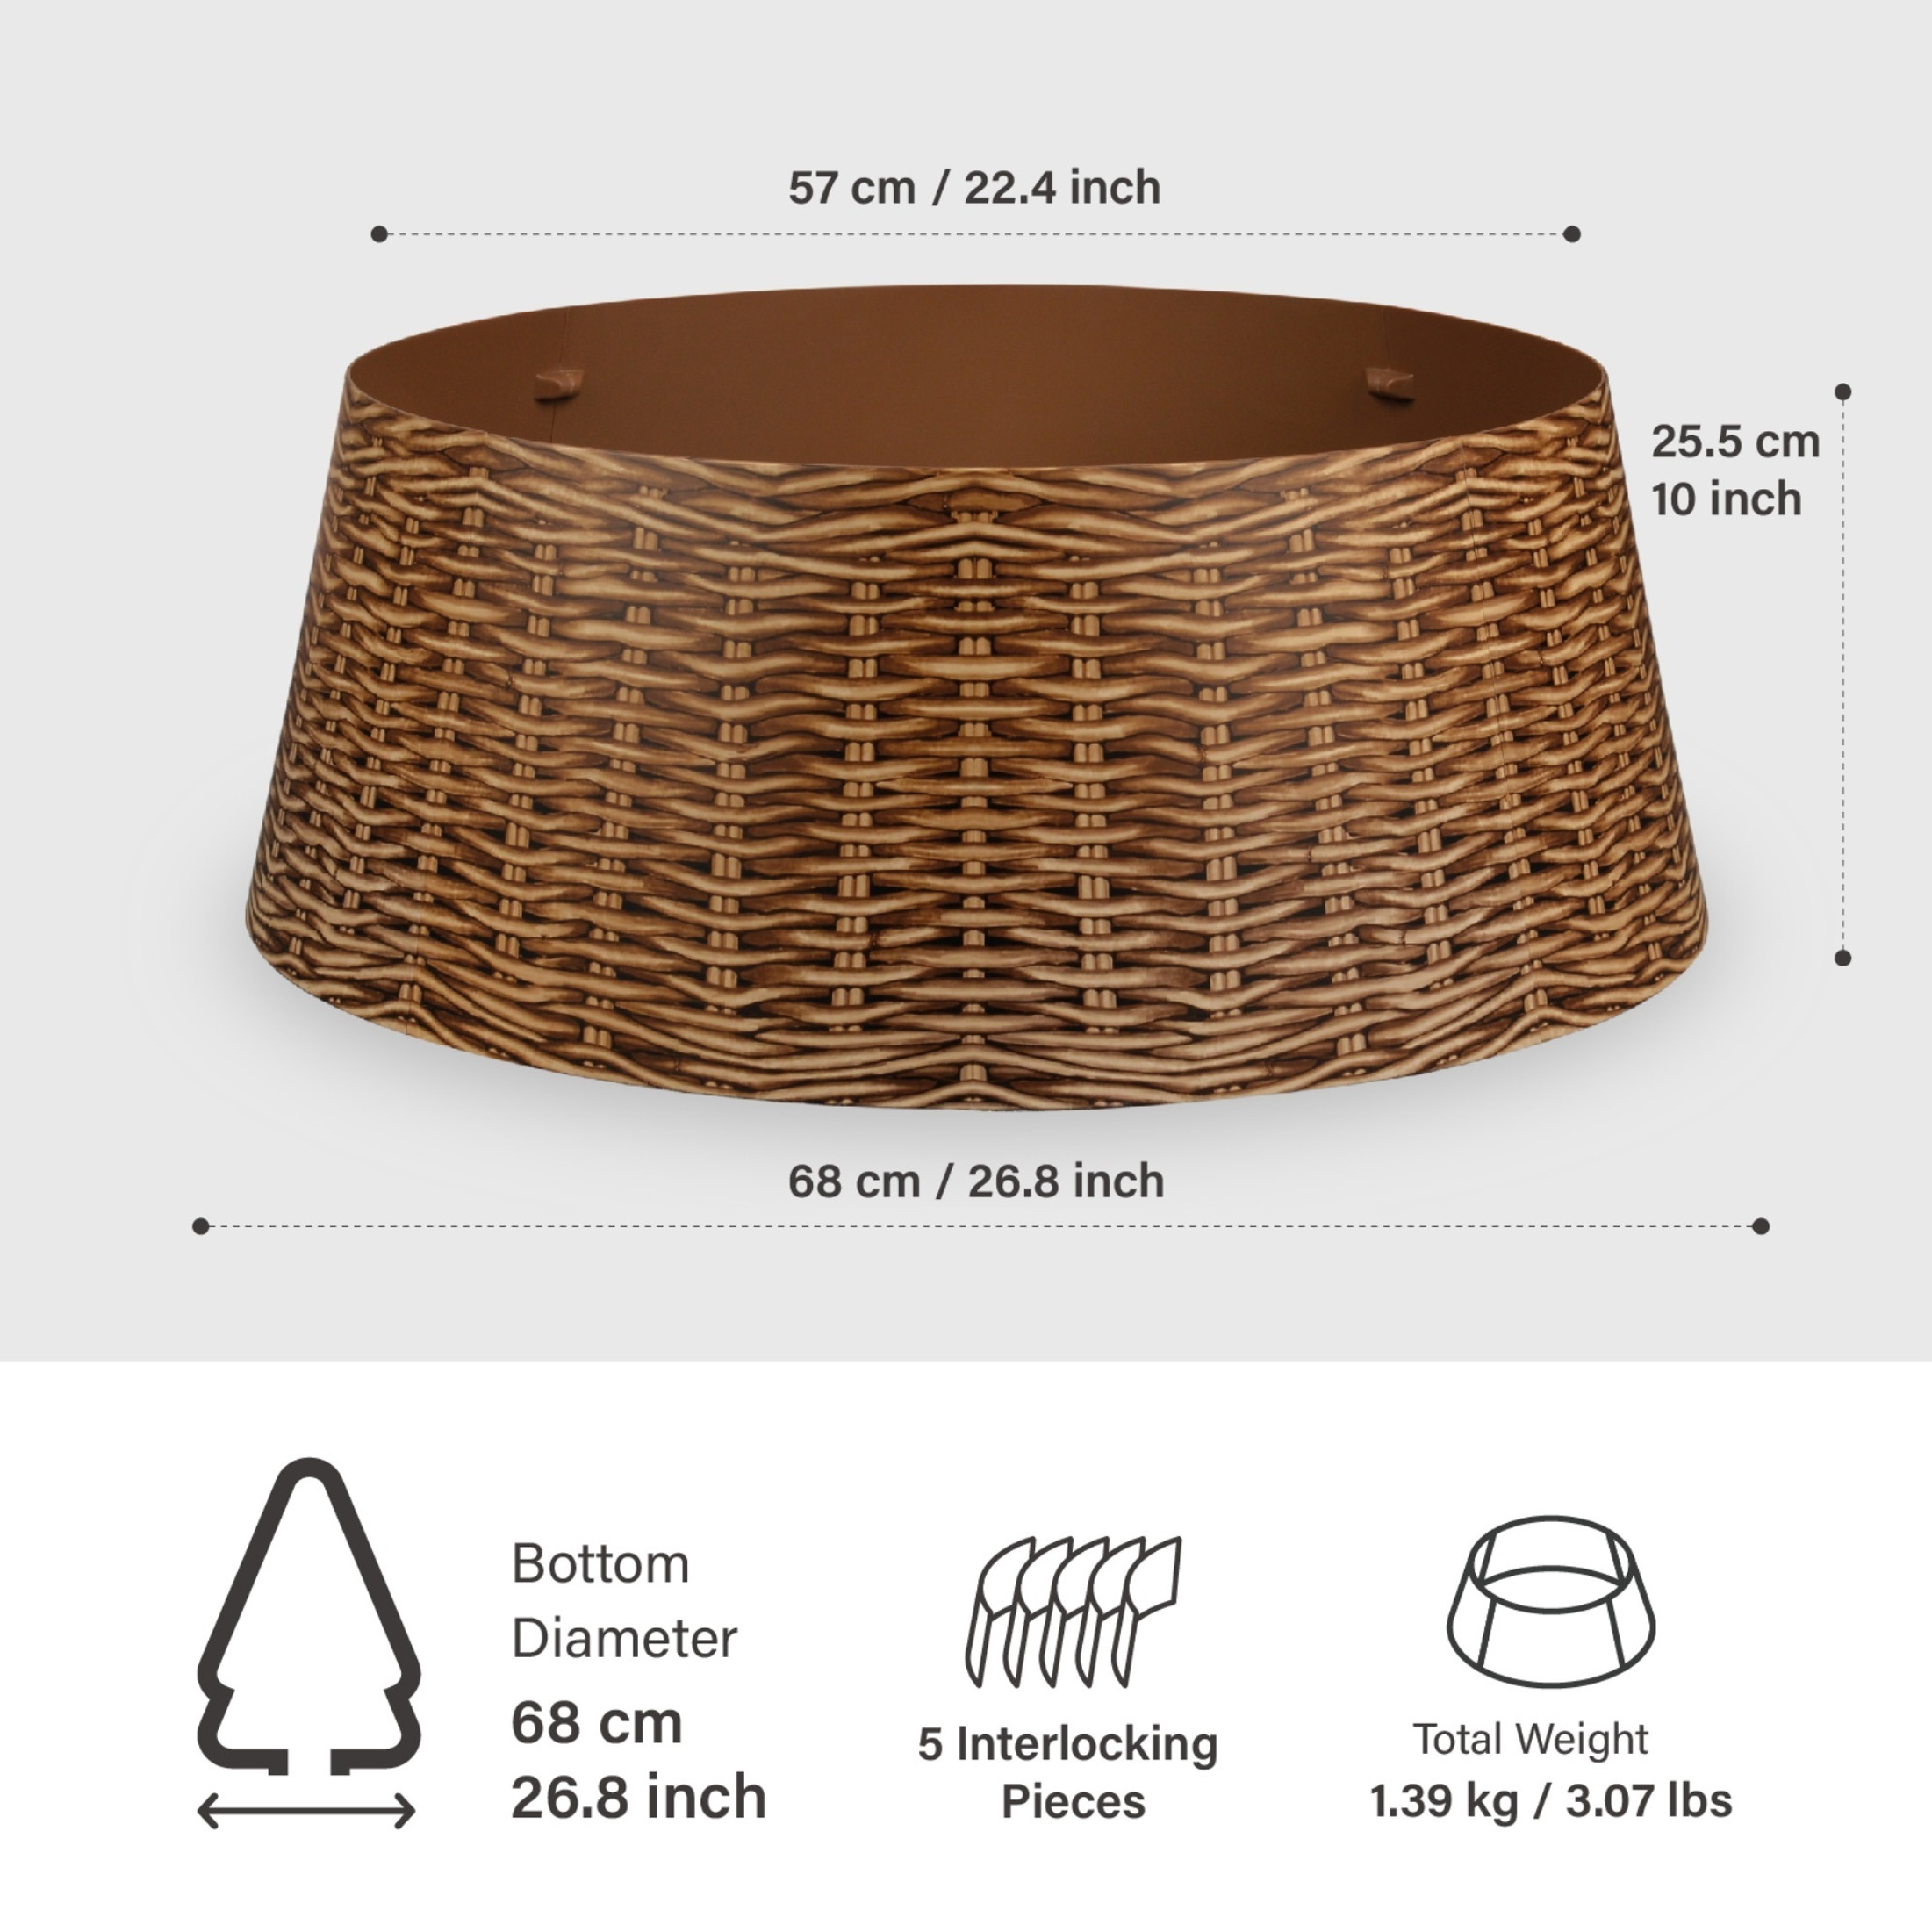 Tree Nest Christmas Live/Artificial Christmas Plastic Weaved Basket Design Tree Stand Collar Skirt Decoration, Brown, Large (REBOXED)